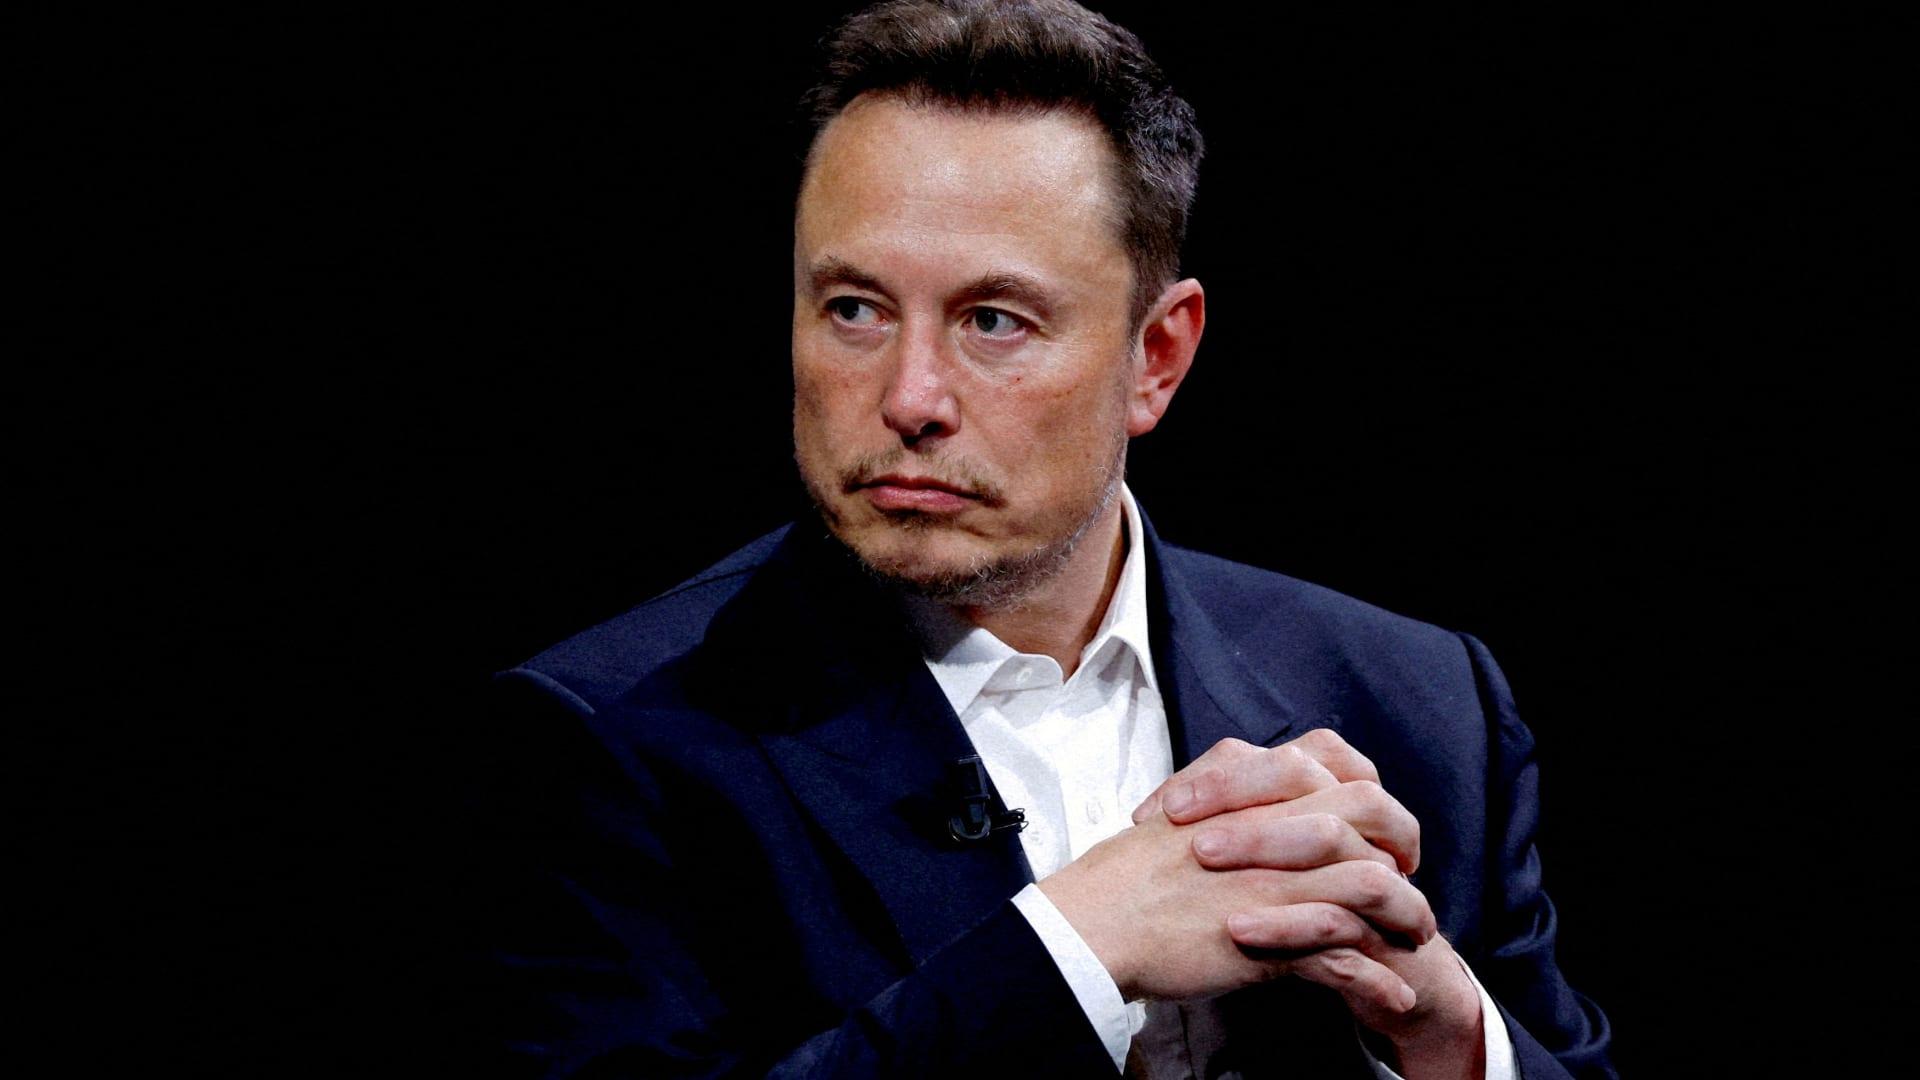 Elon Musk email says Tesla sent 'incorrectly low' severance packages to laid-off employees